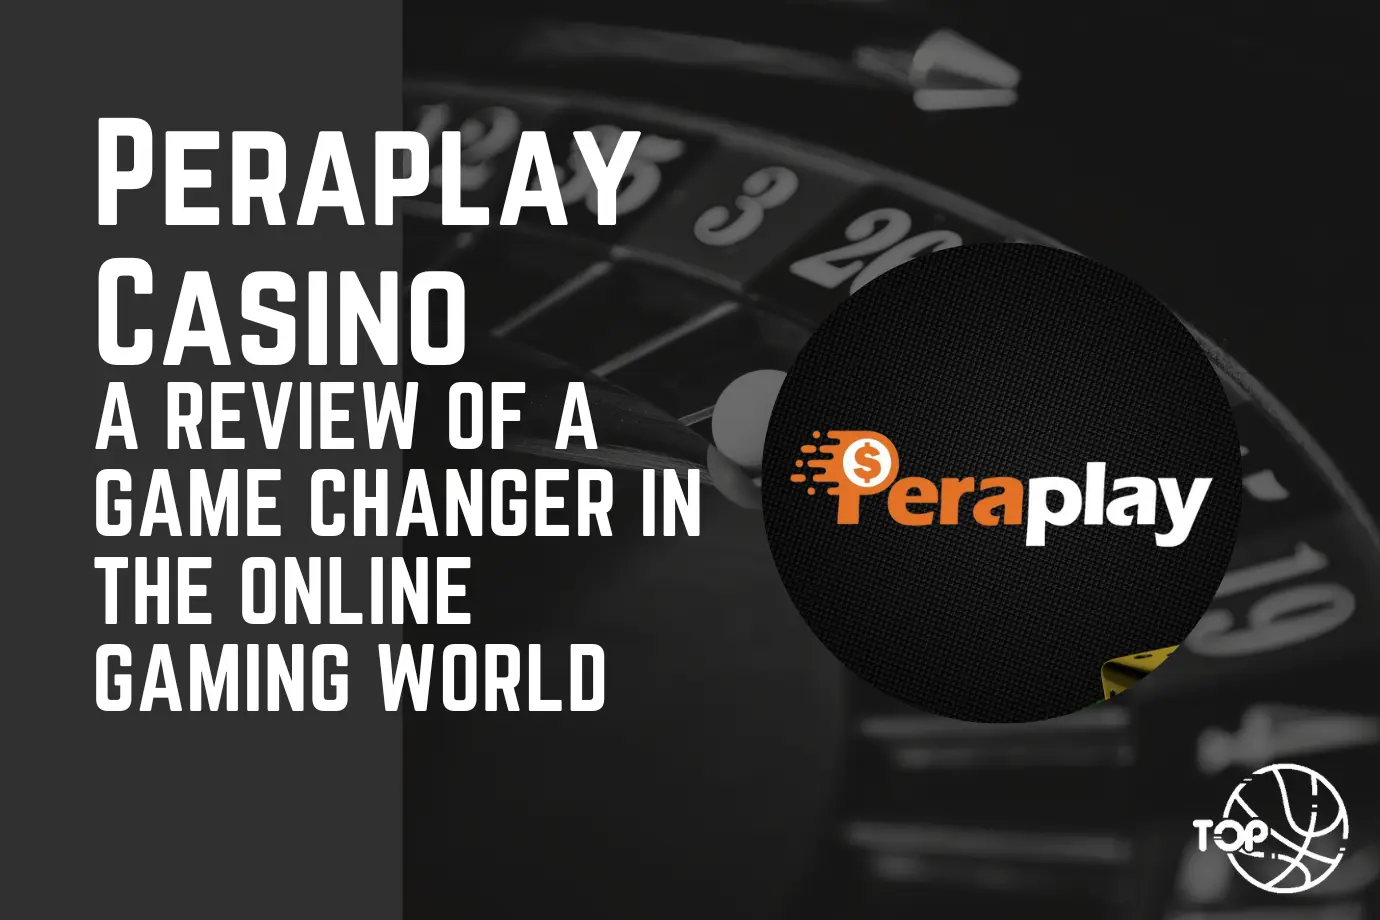 Peraplay Casino: A Review of a Game Changer in the Online Gaming World